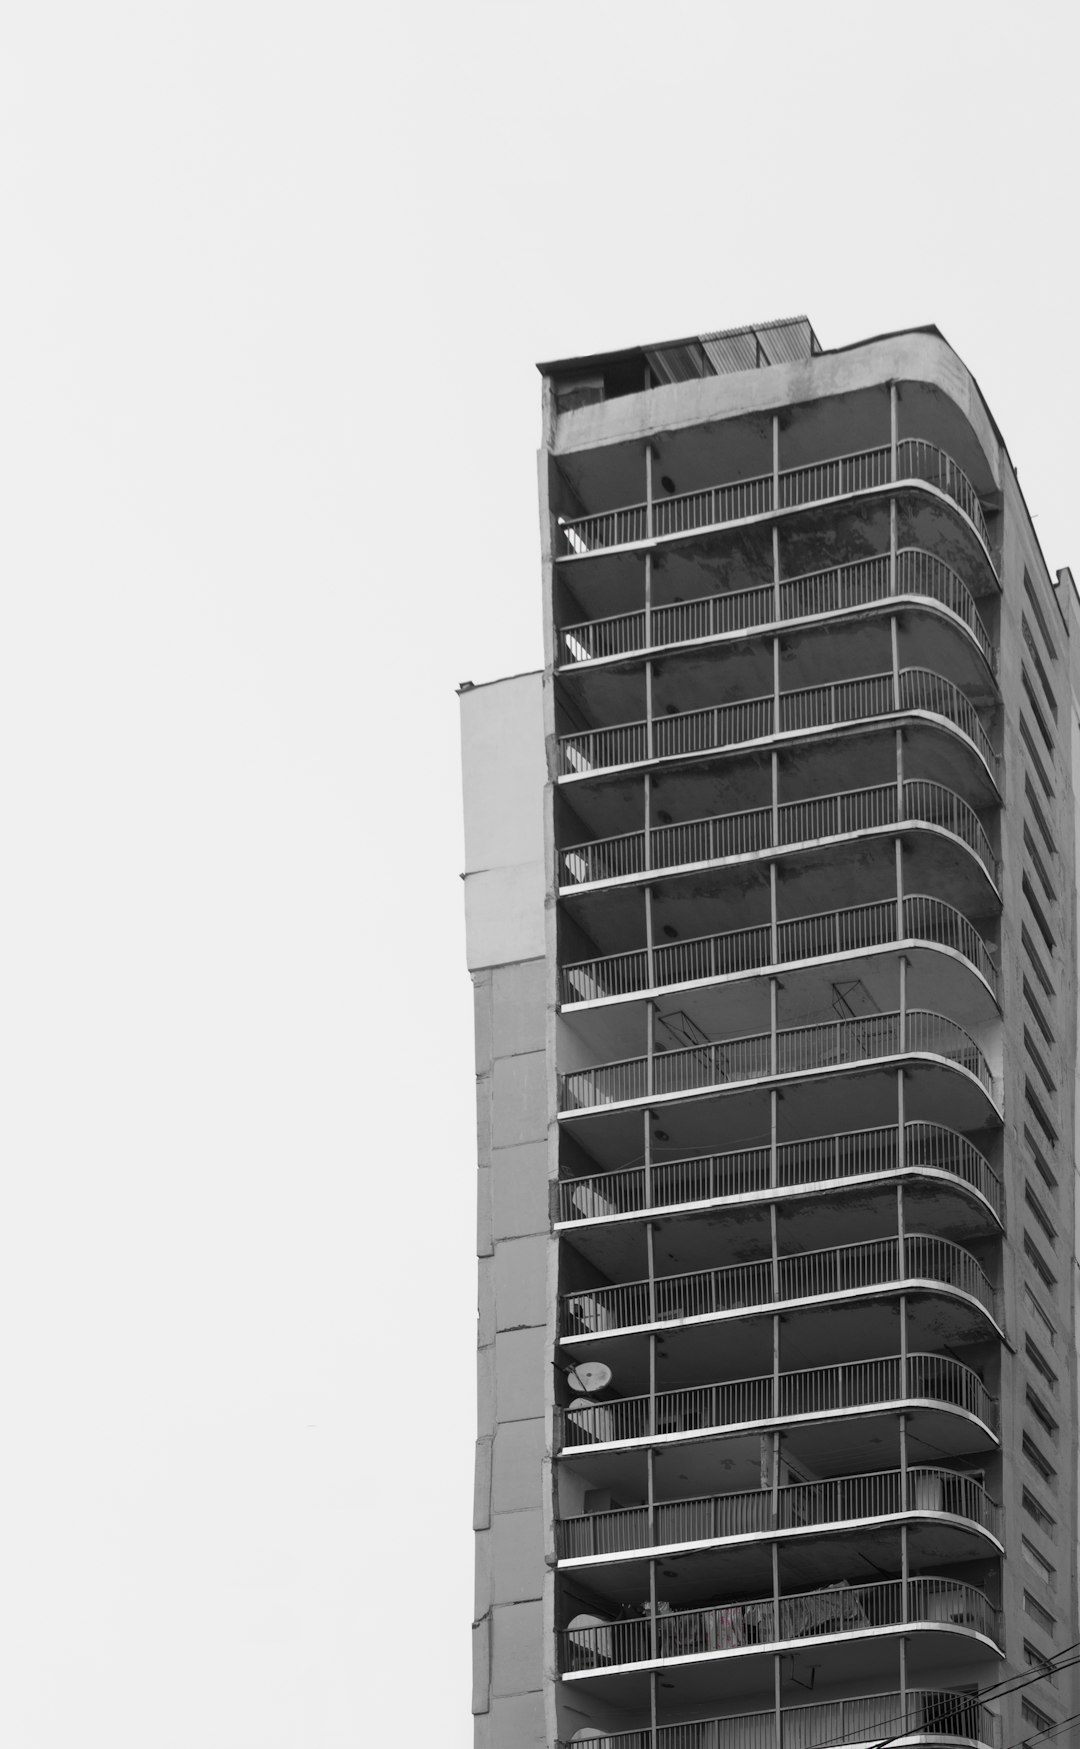 high-rise building, balcony, simple lines, black and white, monochrome, flat colors, architectural photography, side view, perspective –ar 79:128